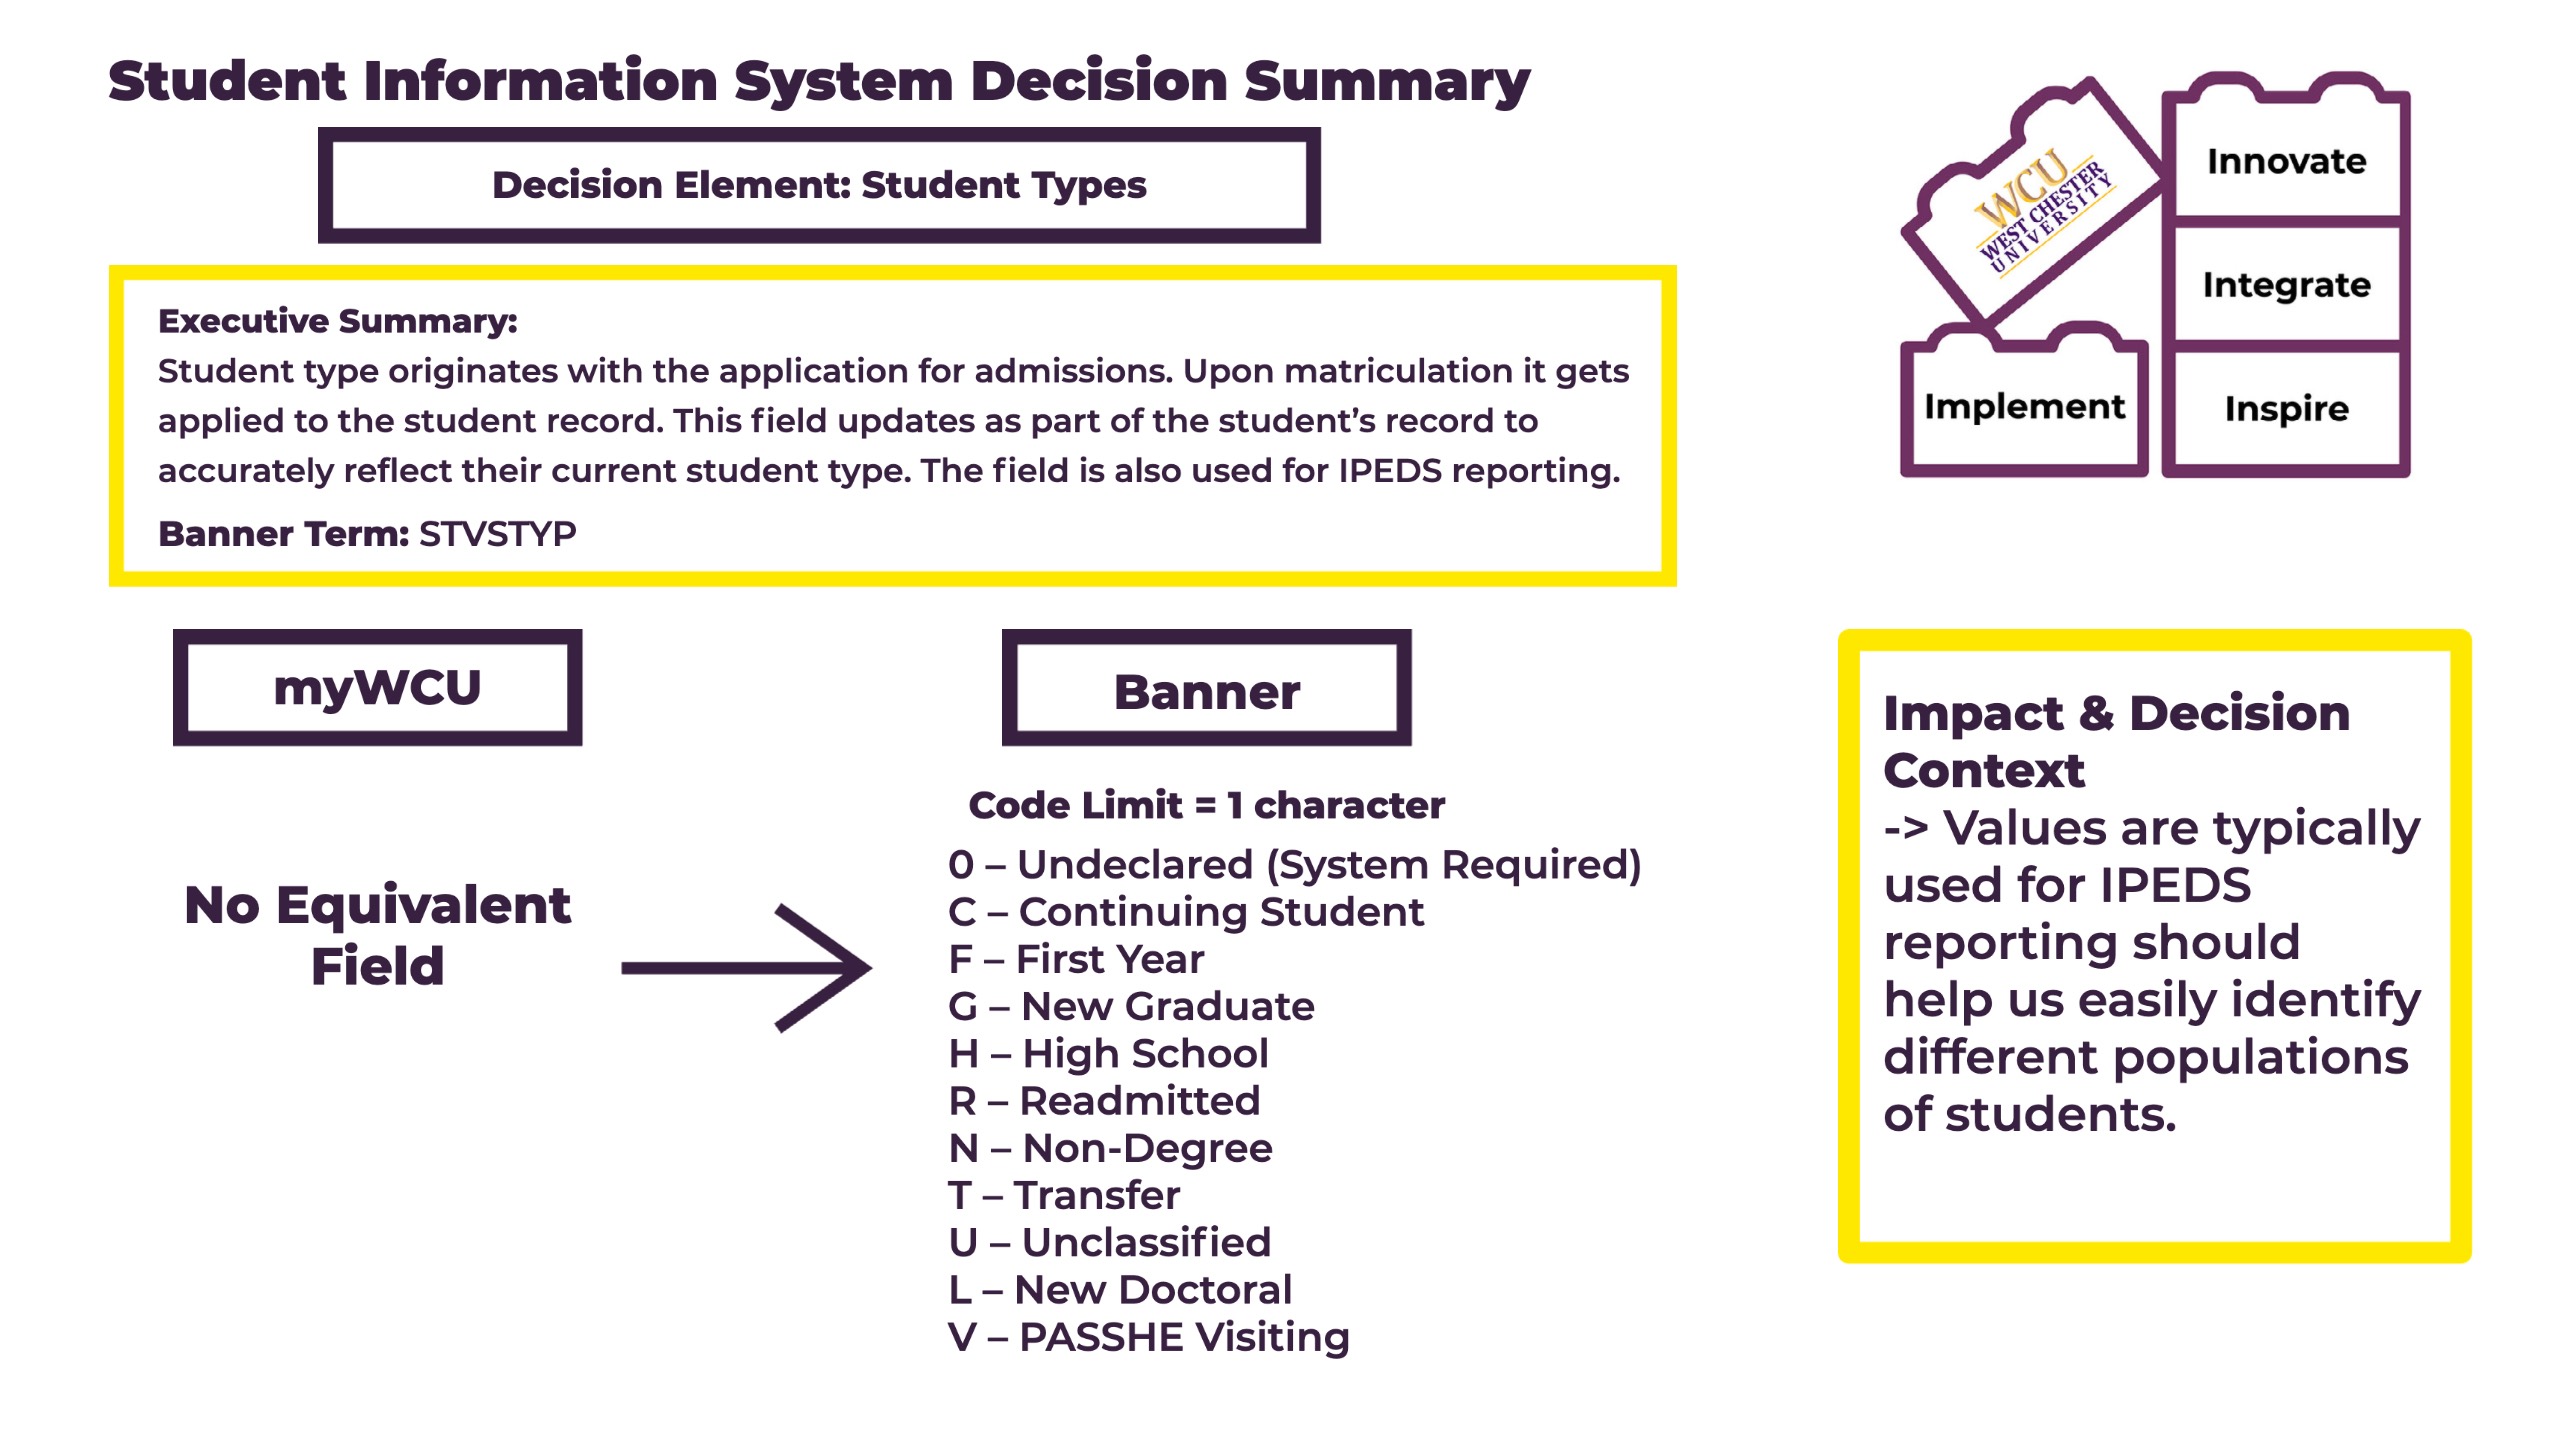   Student Information System Decision Summary Decision Element: Student Types WCU WEST CHESTER UNIVERSITY Innovate Integrate Executive Summary: Student type originates with the application for admissions. Upon matriculation it gets applied to the student record. This field updates as part of the student's record to accurately reflect their current student type. The field is also used for IPEDS reporting. Banner Term: STVSTYP Implement Inspire myWCU No Equivalent Field ↑ Banner Code Limit = 1 character O - Undeclared (System Required) C- Continuing Student F - First Year G-New Graduate H - High School R-Readmitted N - Non-Degree T-Transfer U - Unclassified L- New Doctoral V-PASSHE Visiting Impact & Decision Context -> Values are typically used for IPEDS reporting should help us easily identify different populations of students.